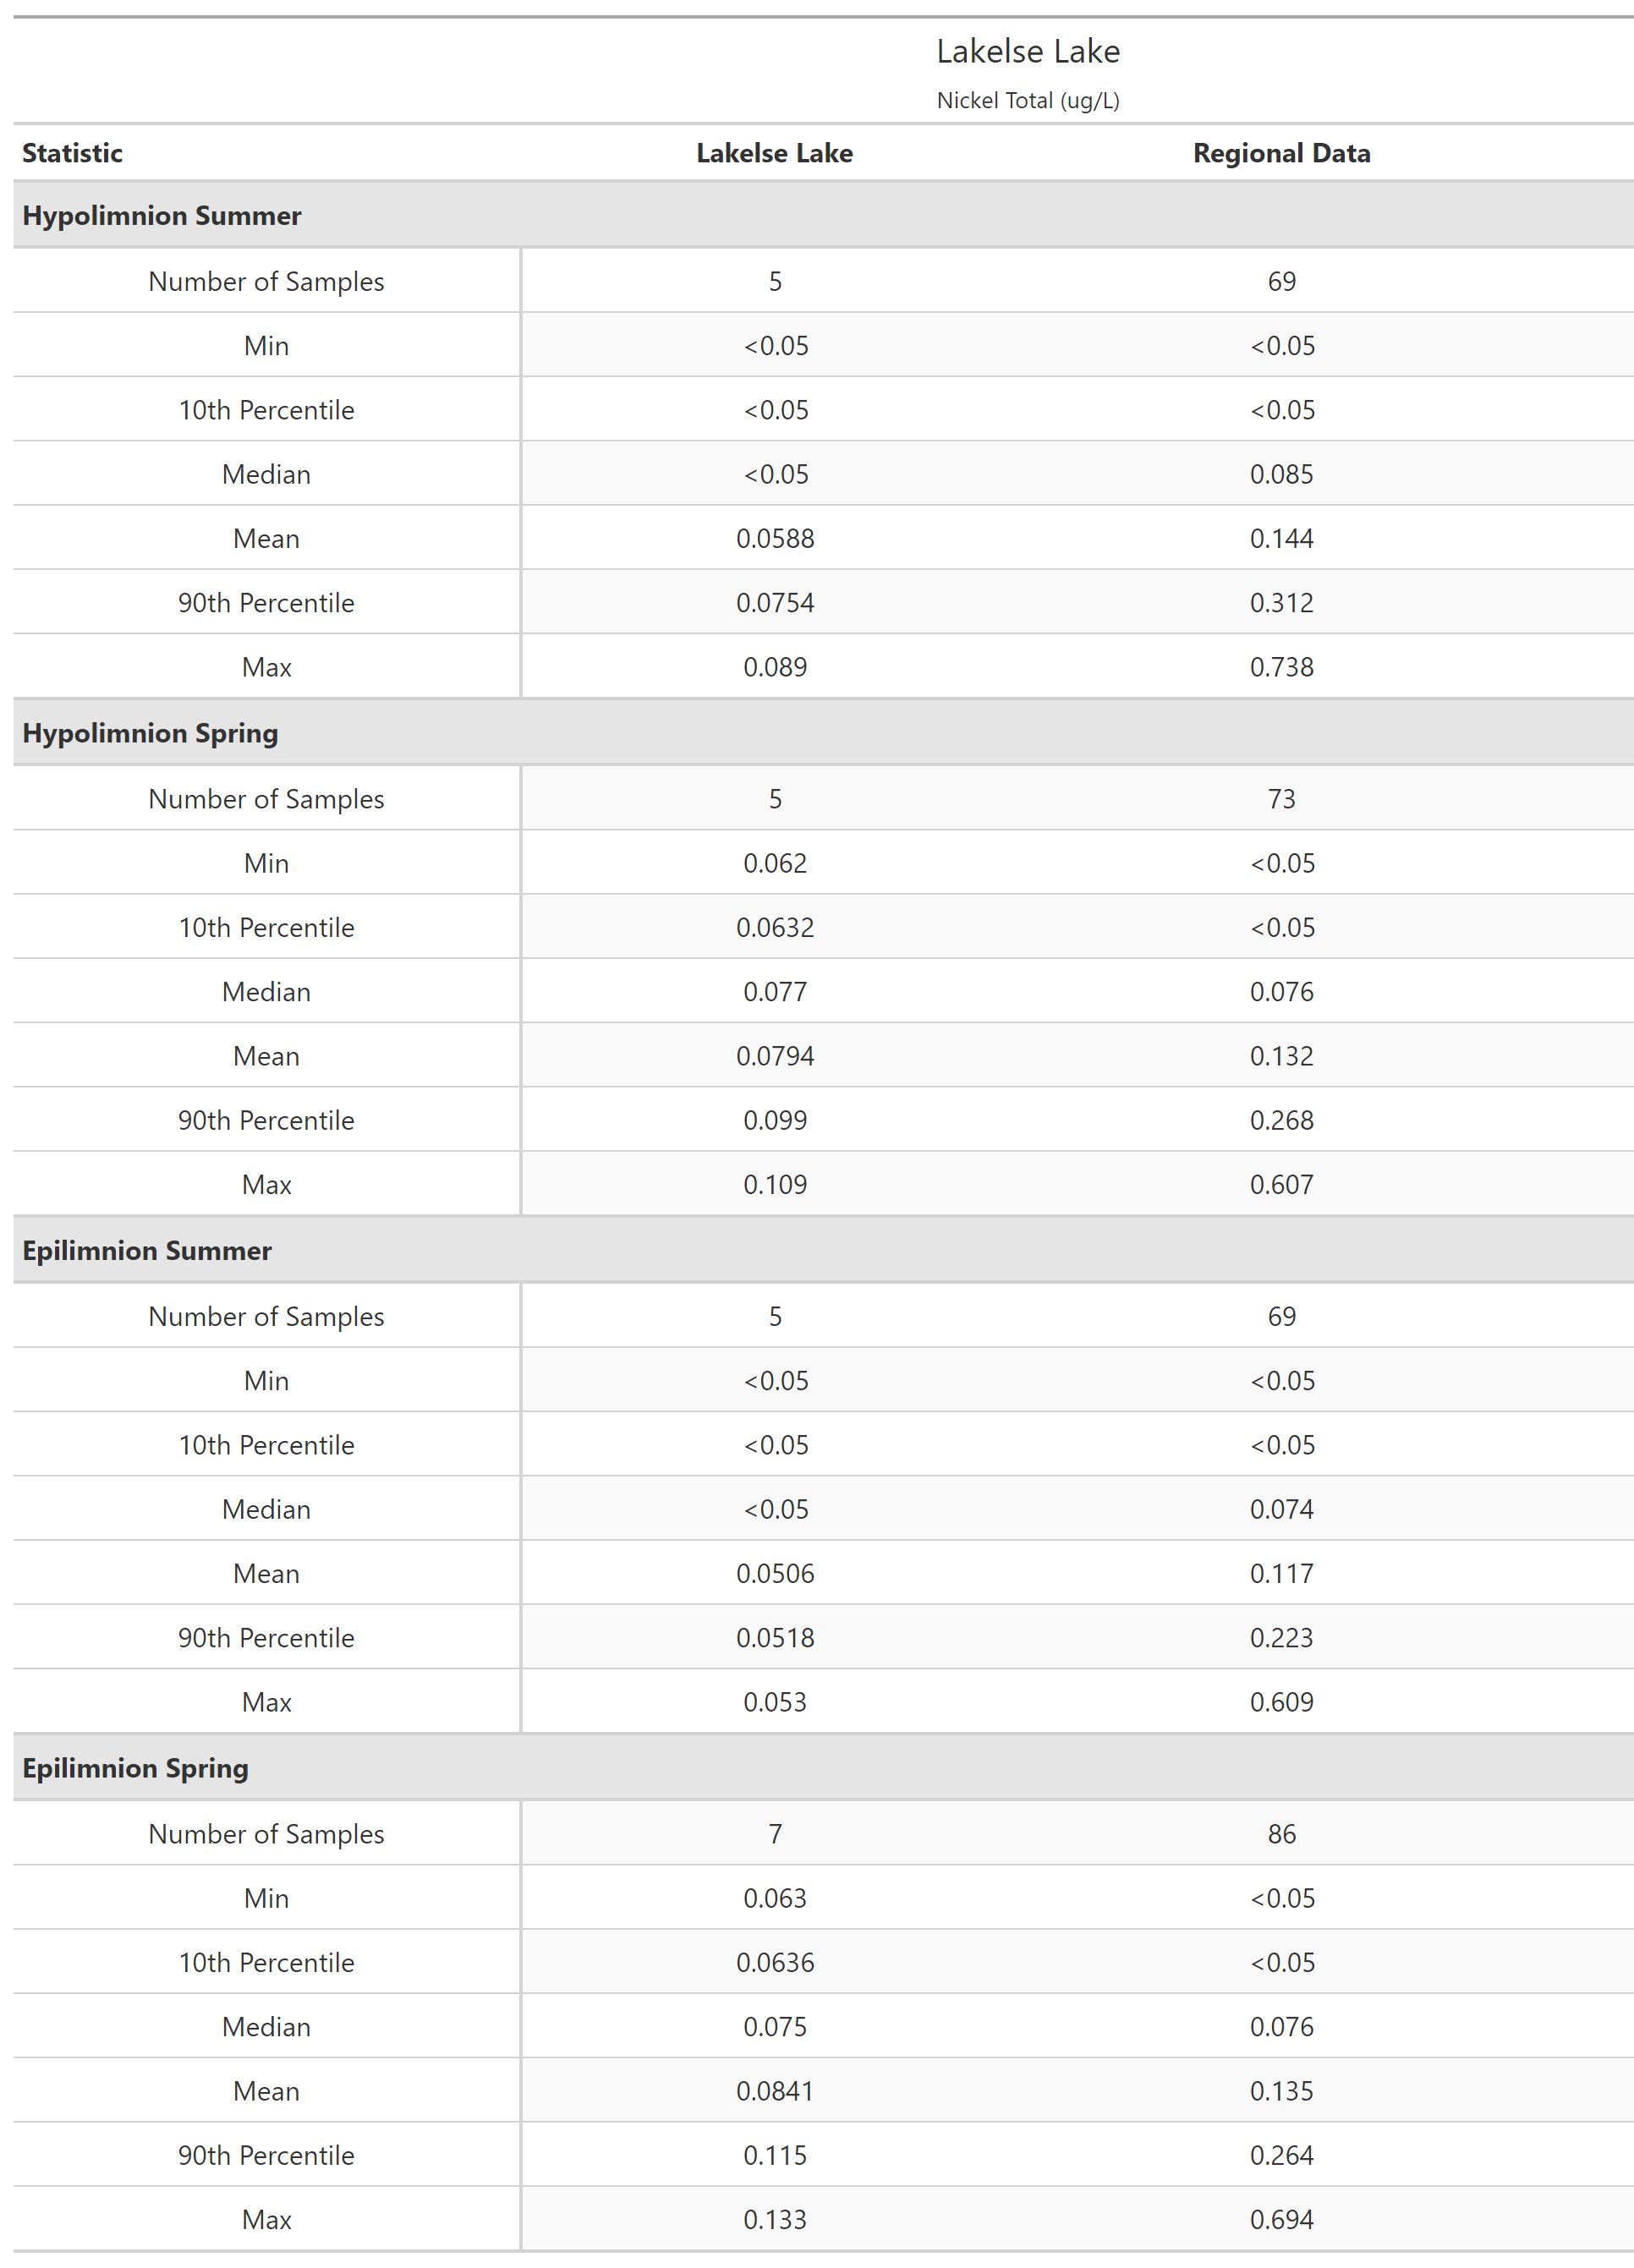 A table of summary statistics for Nickel Total with comparison to regional data